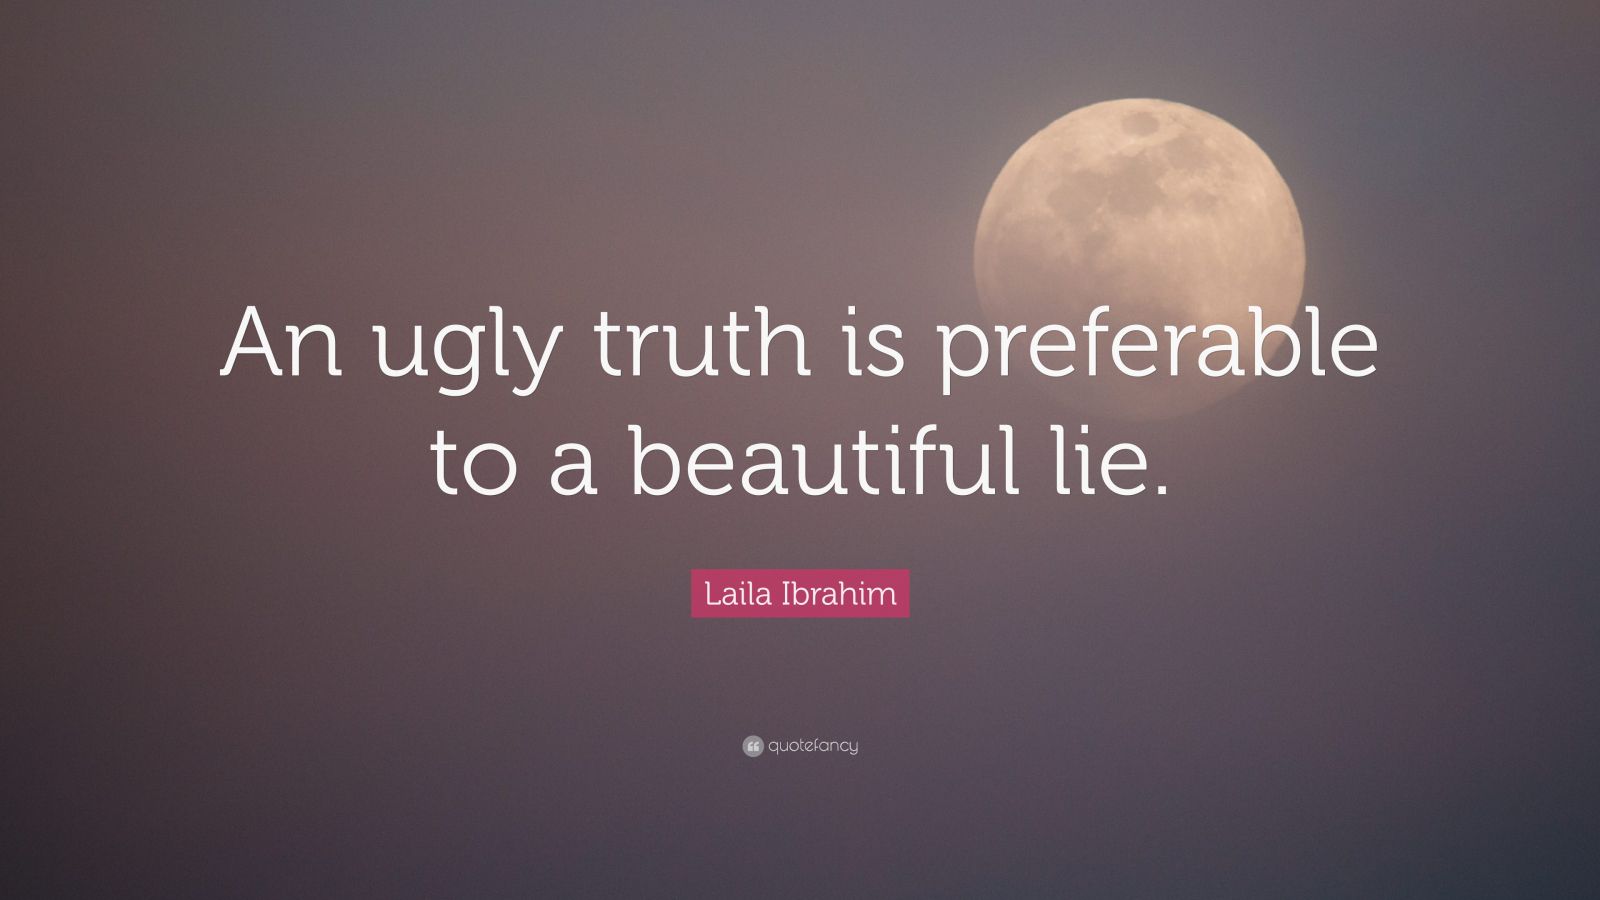 Laila Ibrahim Quote: “An ugly truth is preferable to a beautiful lie.”